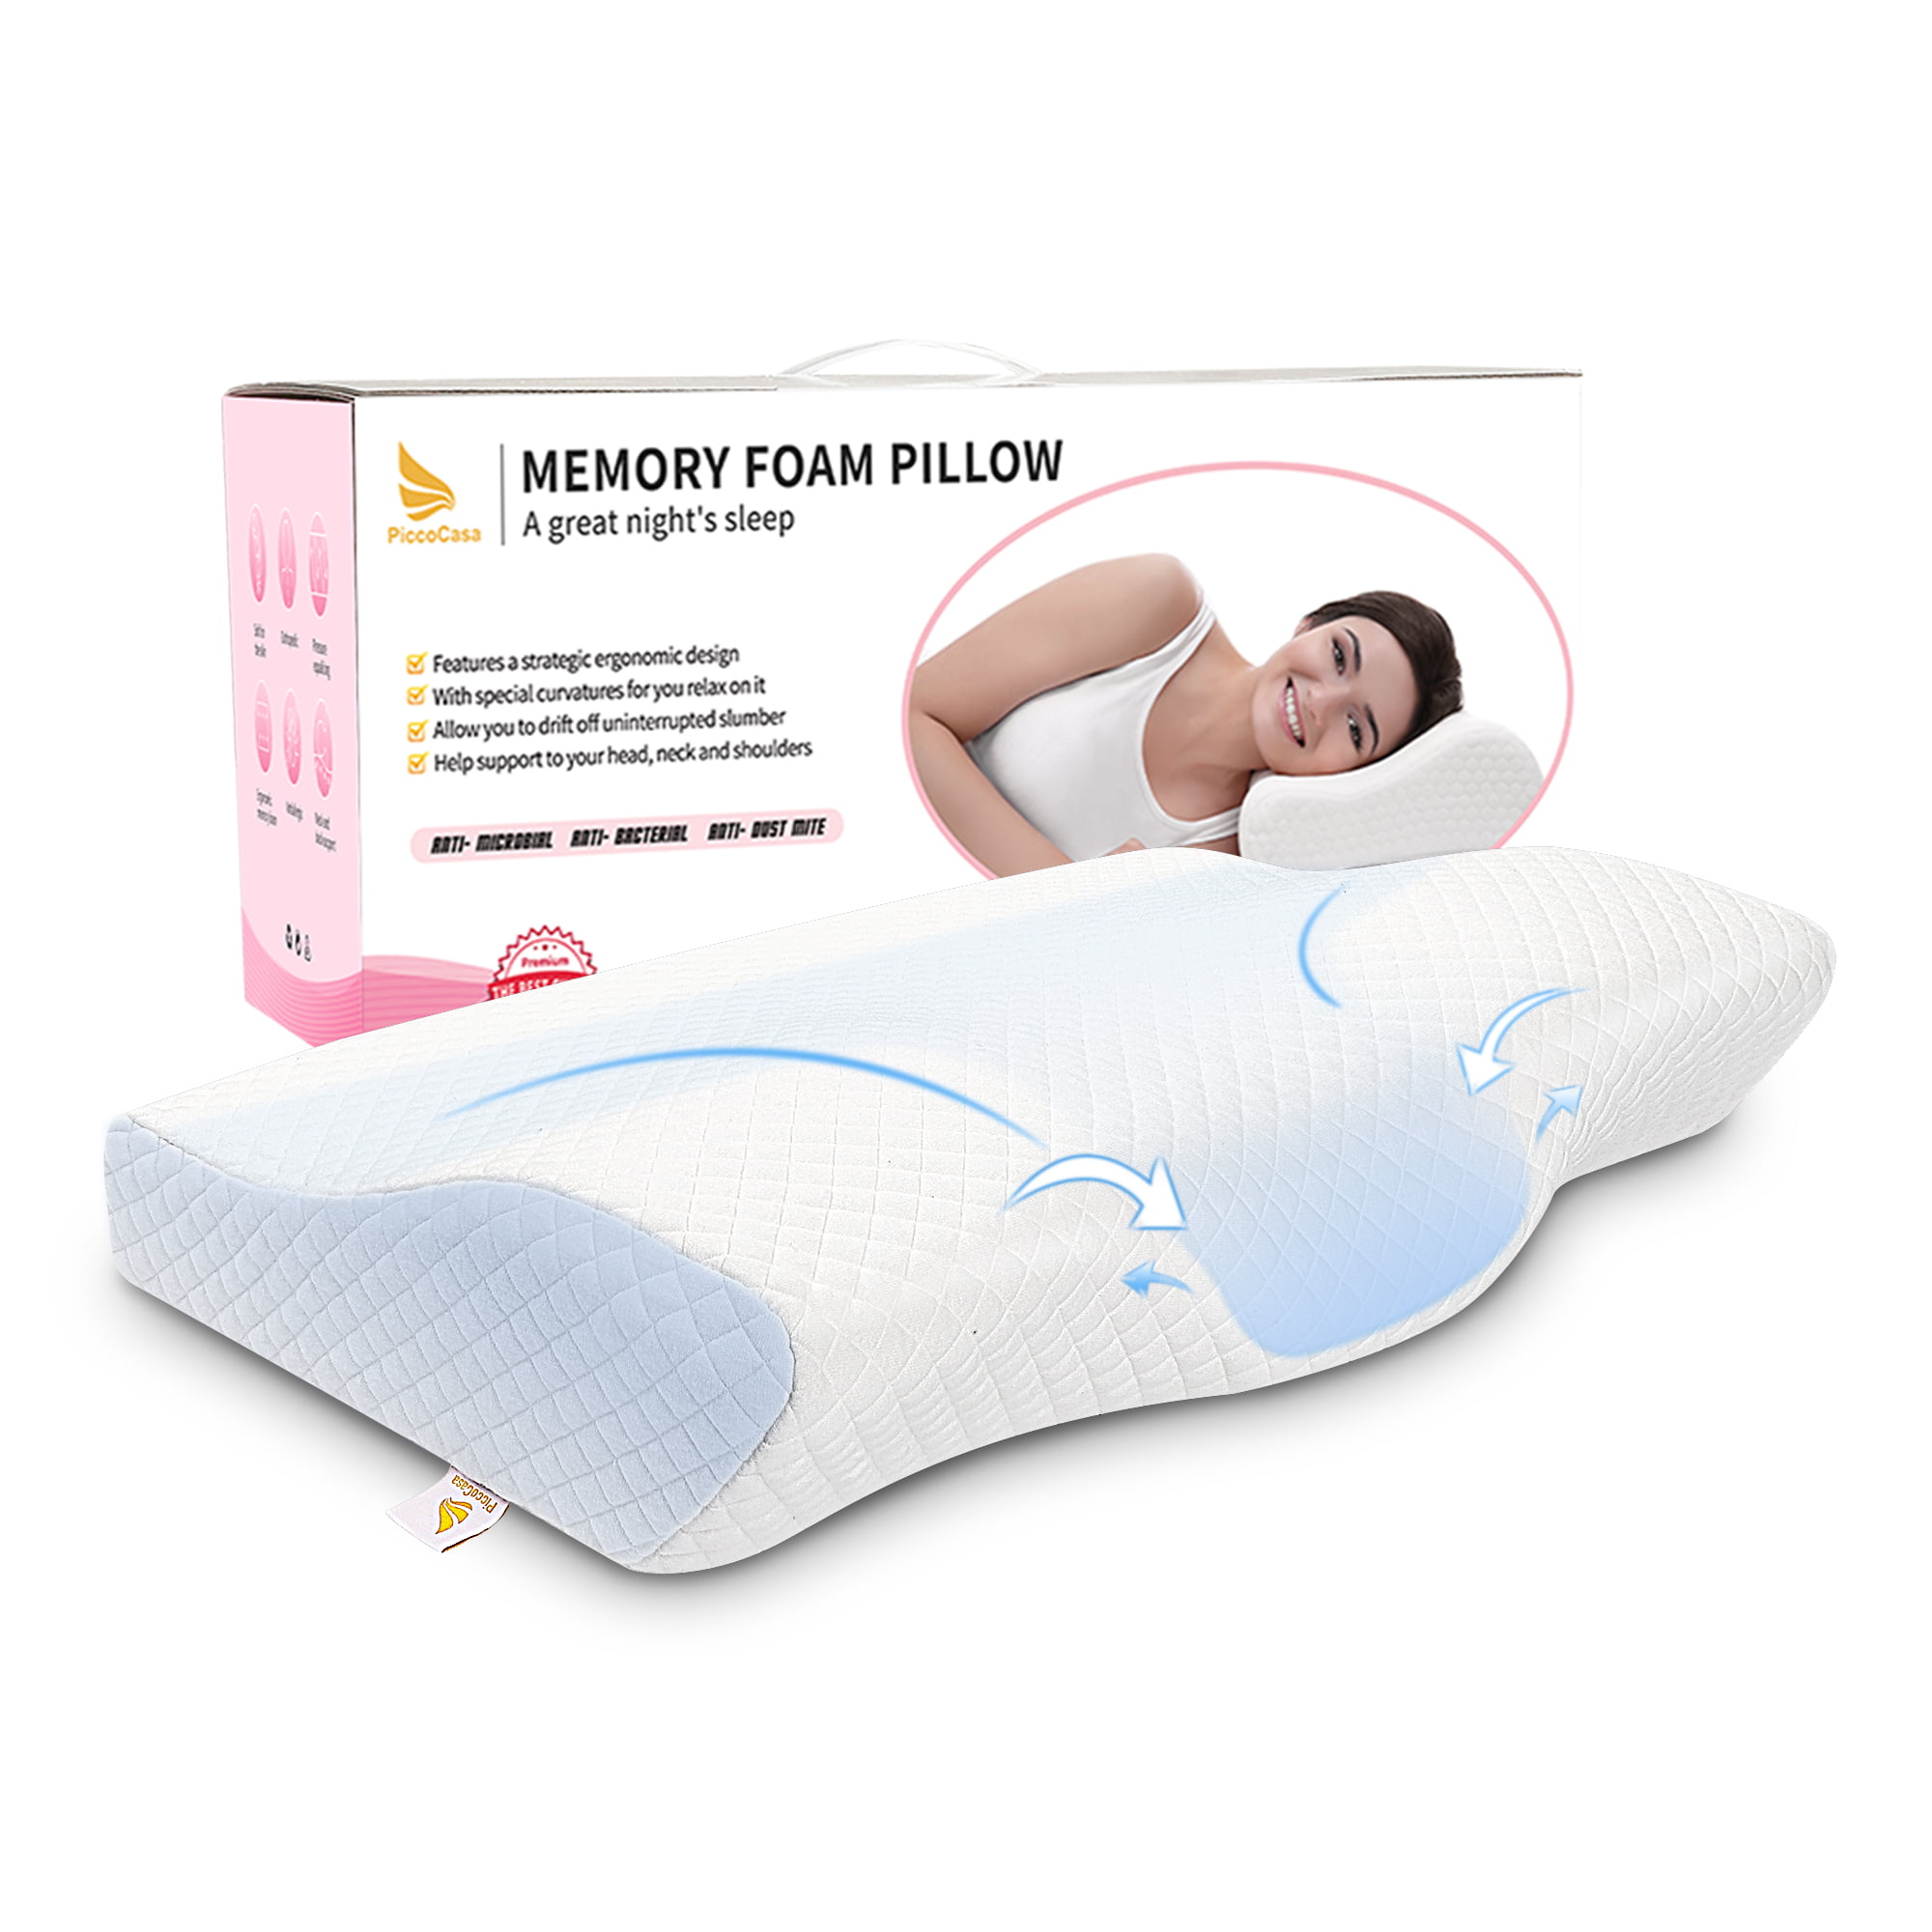 PillowLY Shredded Memory Foam Pillows For Neck Support & Pain Relief 2 Comfort 